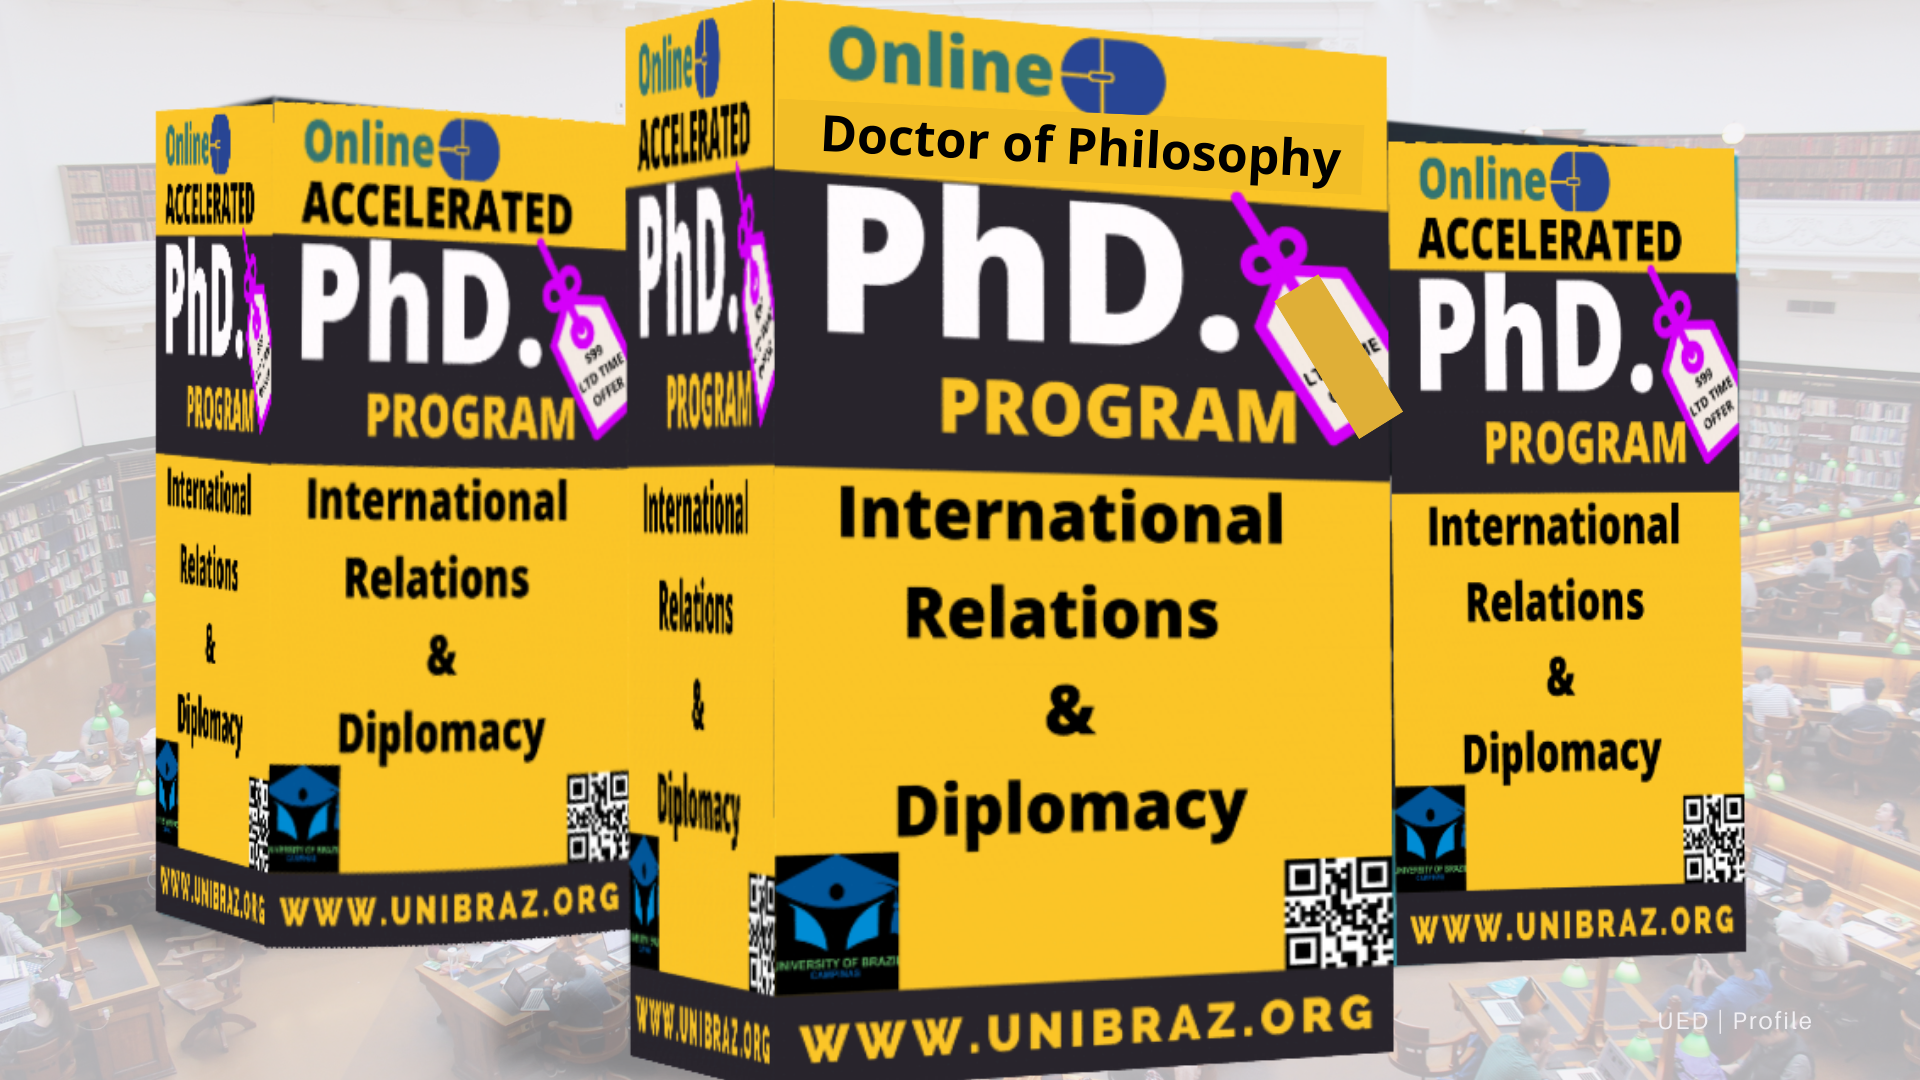 DOCTOR OF PHILOSOPHY (PhD.) INTERNATIONAL RELATIONS AND DIPLOMACY